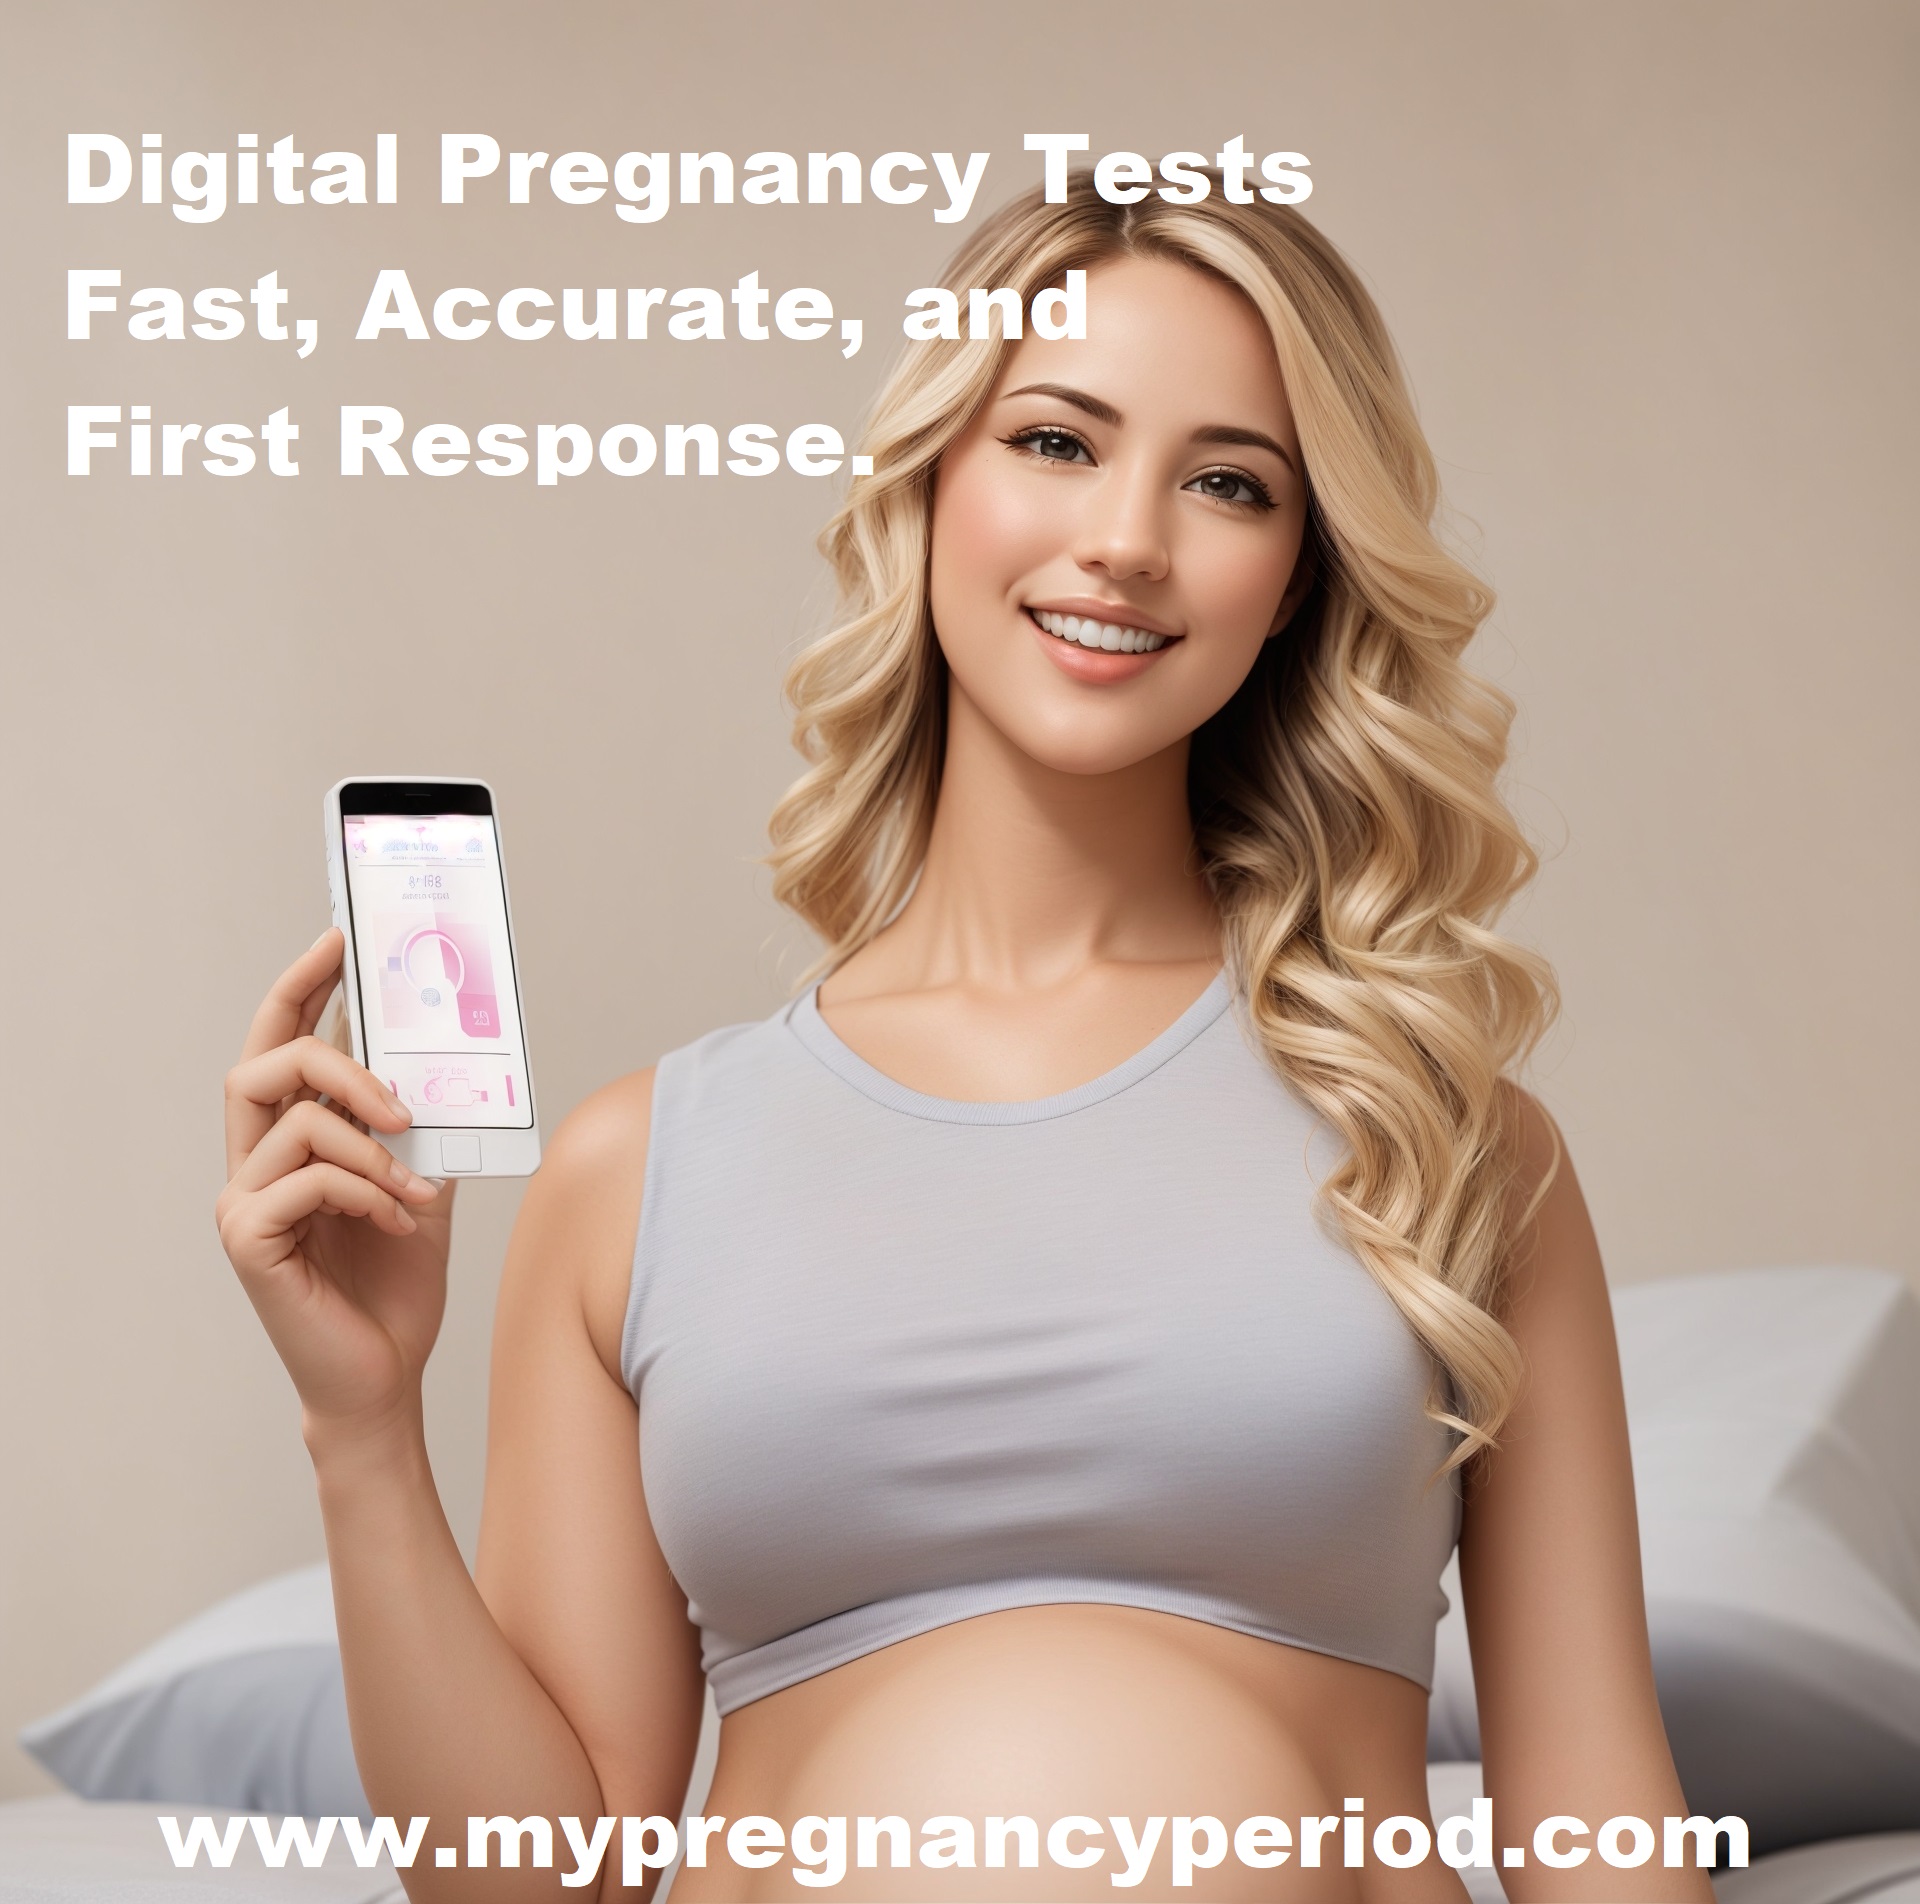 Digital pregnancy tests Fast, Accurate, and First Response.